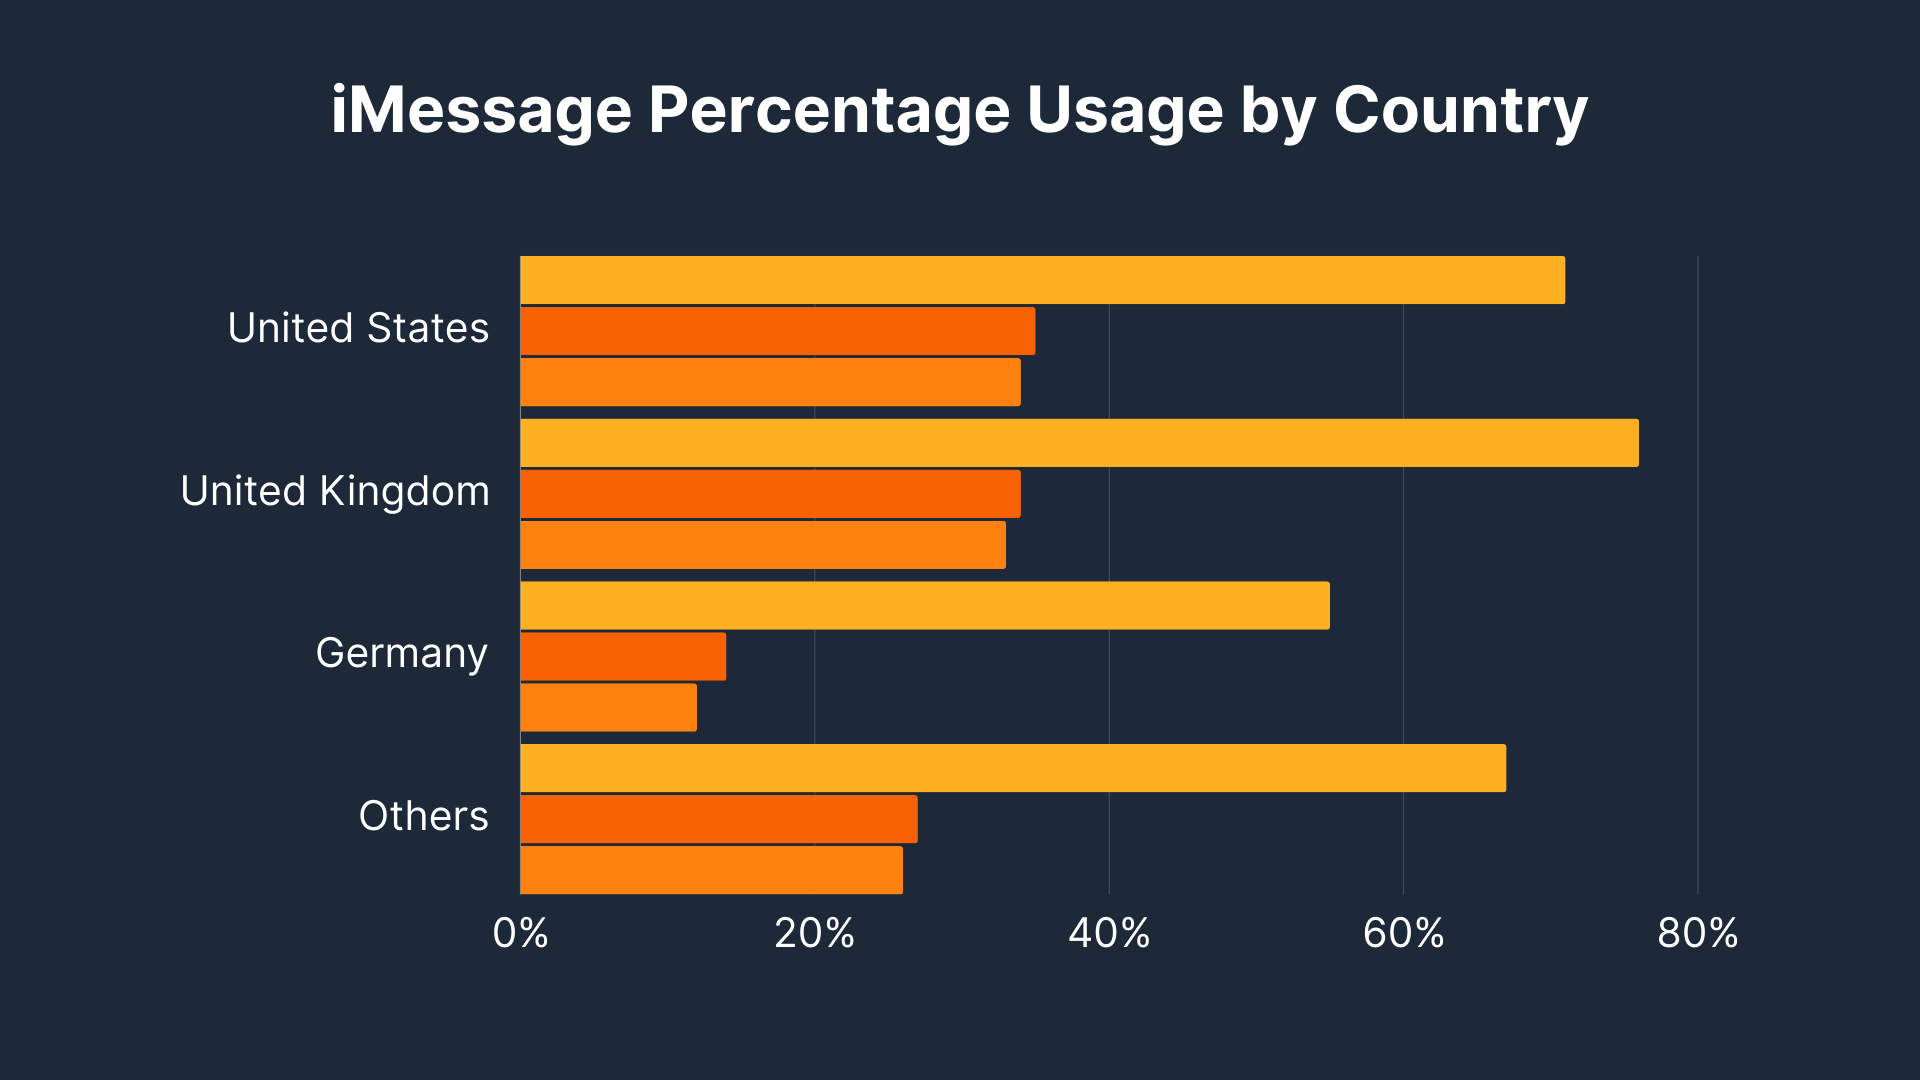 iMessage Percentage Usage by Country